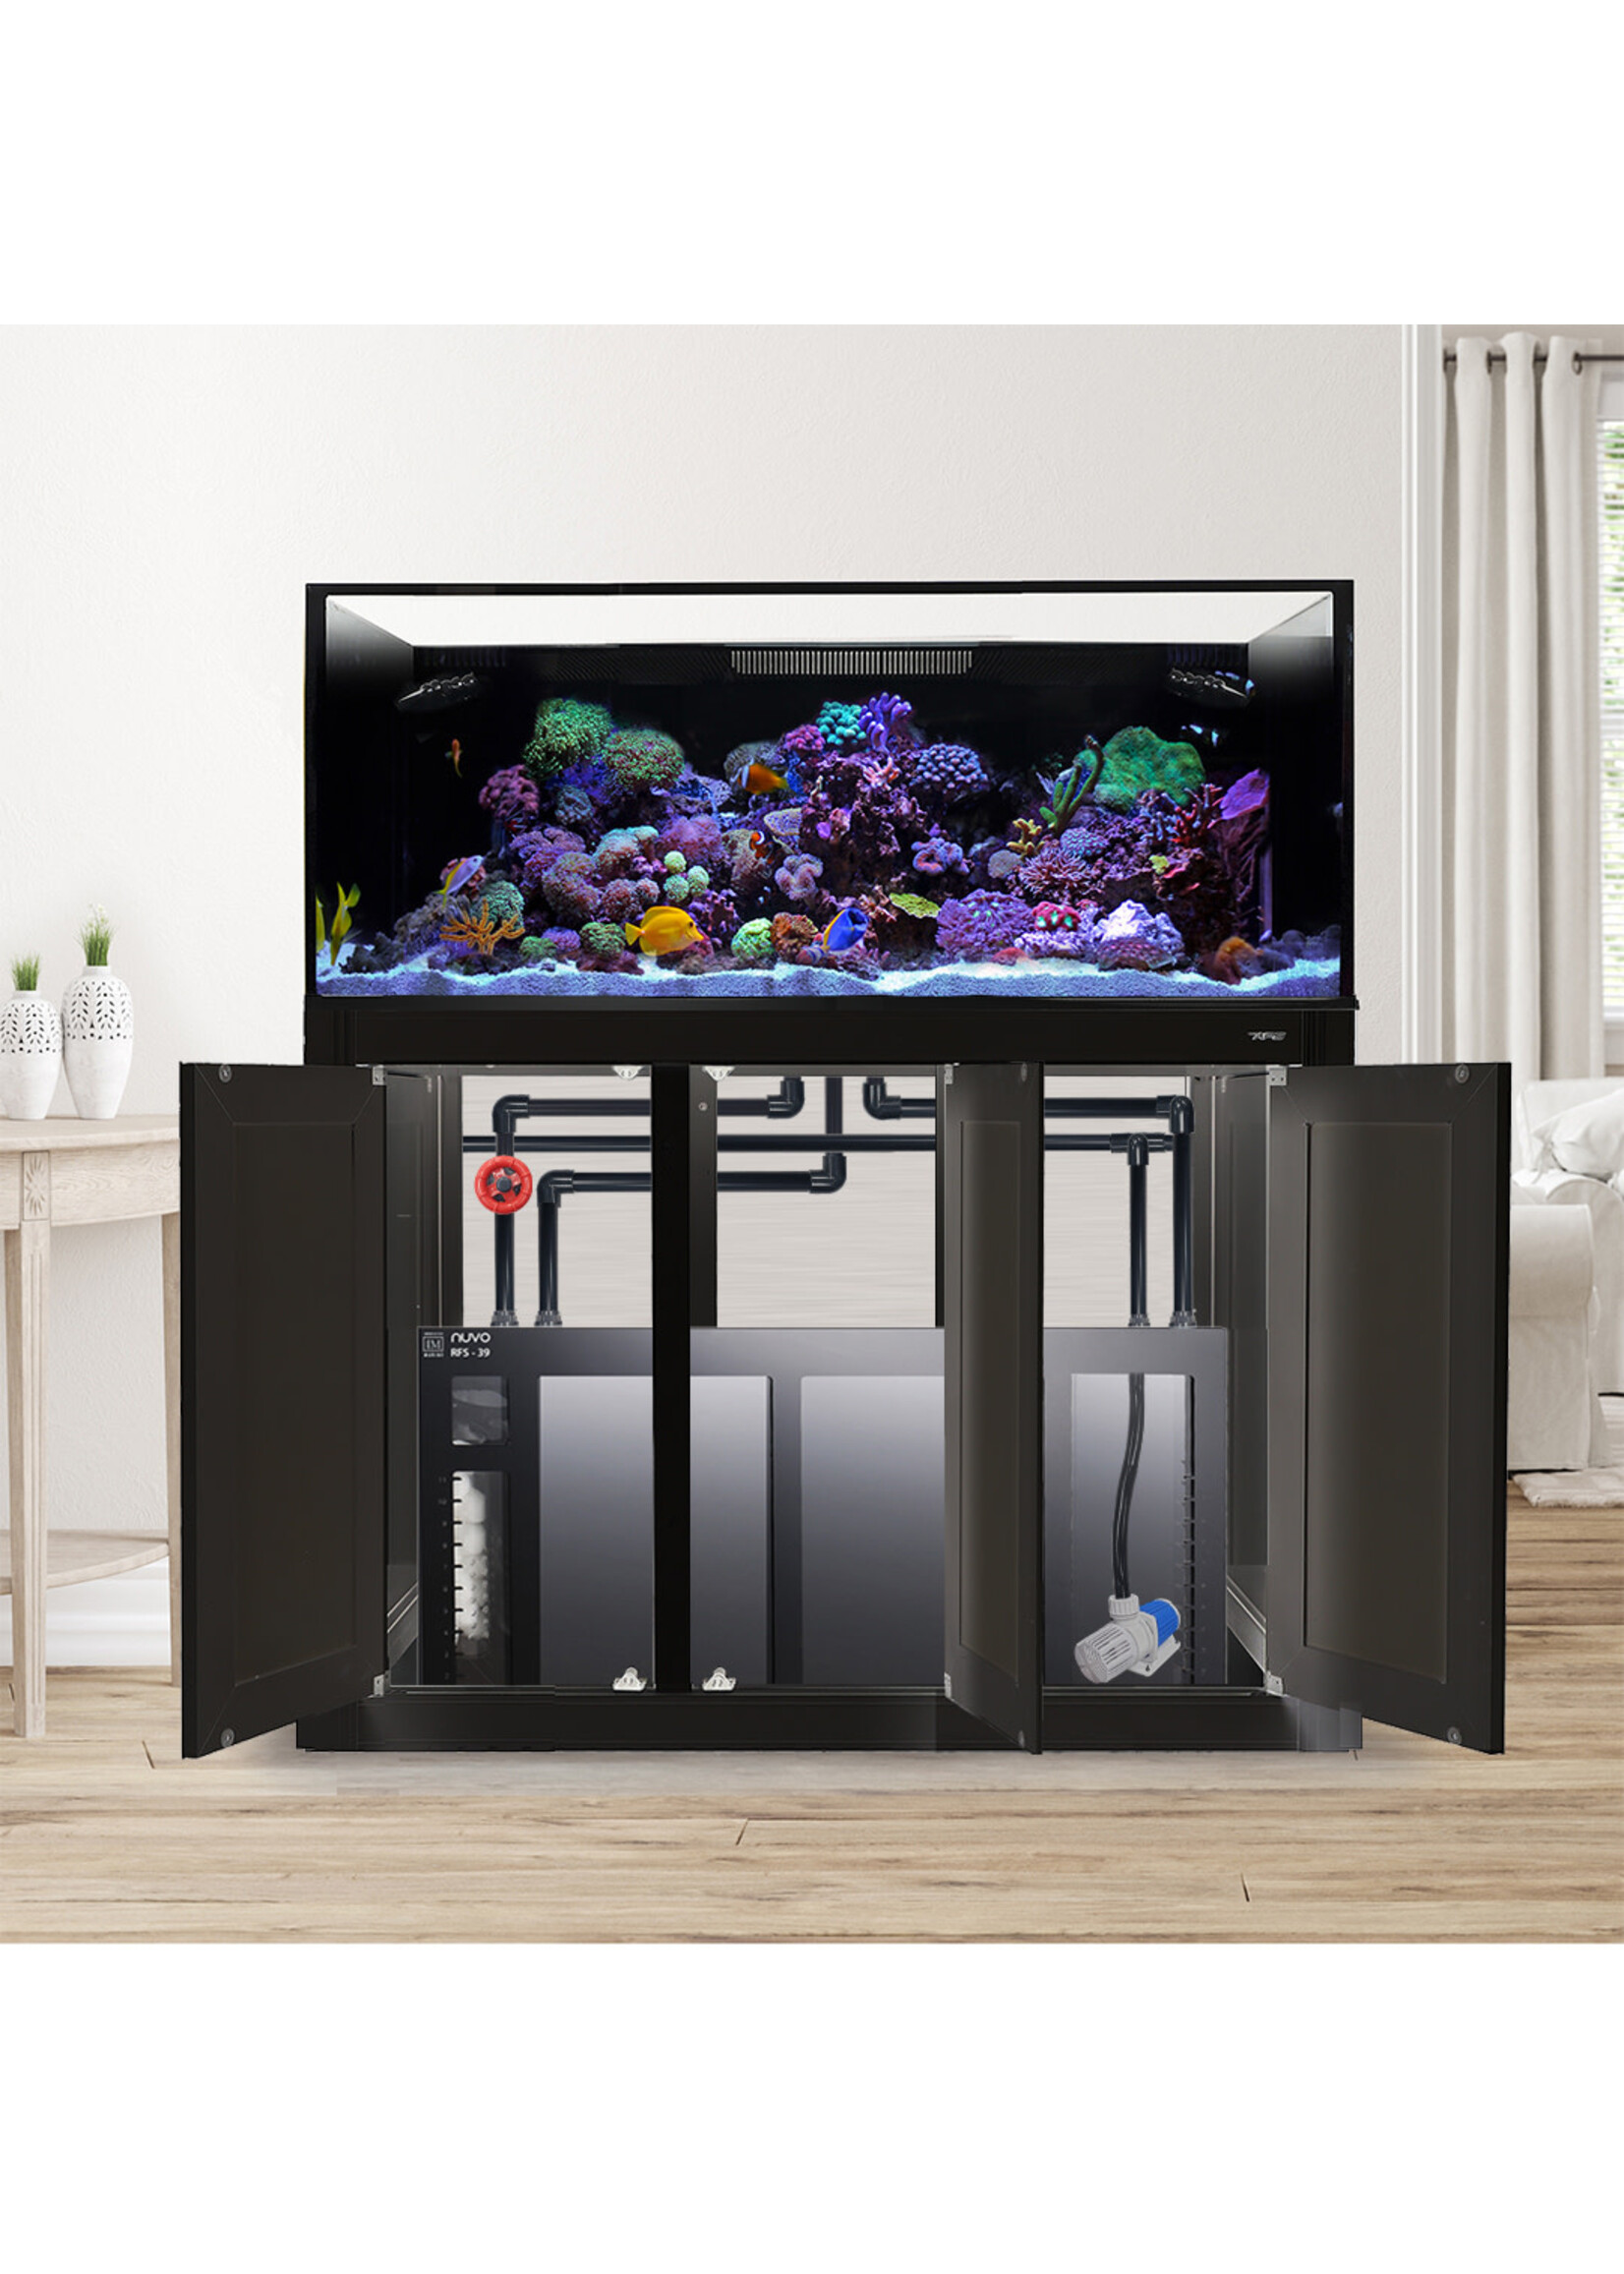 In Sump Protein Skimmers for Saltwater Aquariums up to 100 Gallons Fish  Tank, DC Pump with Controller